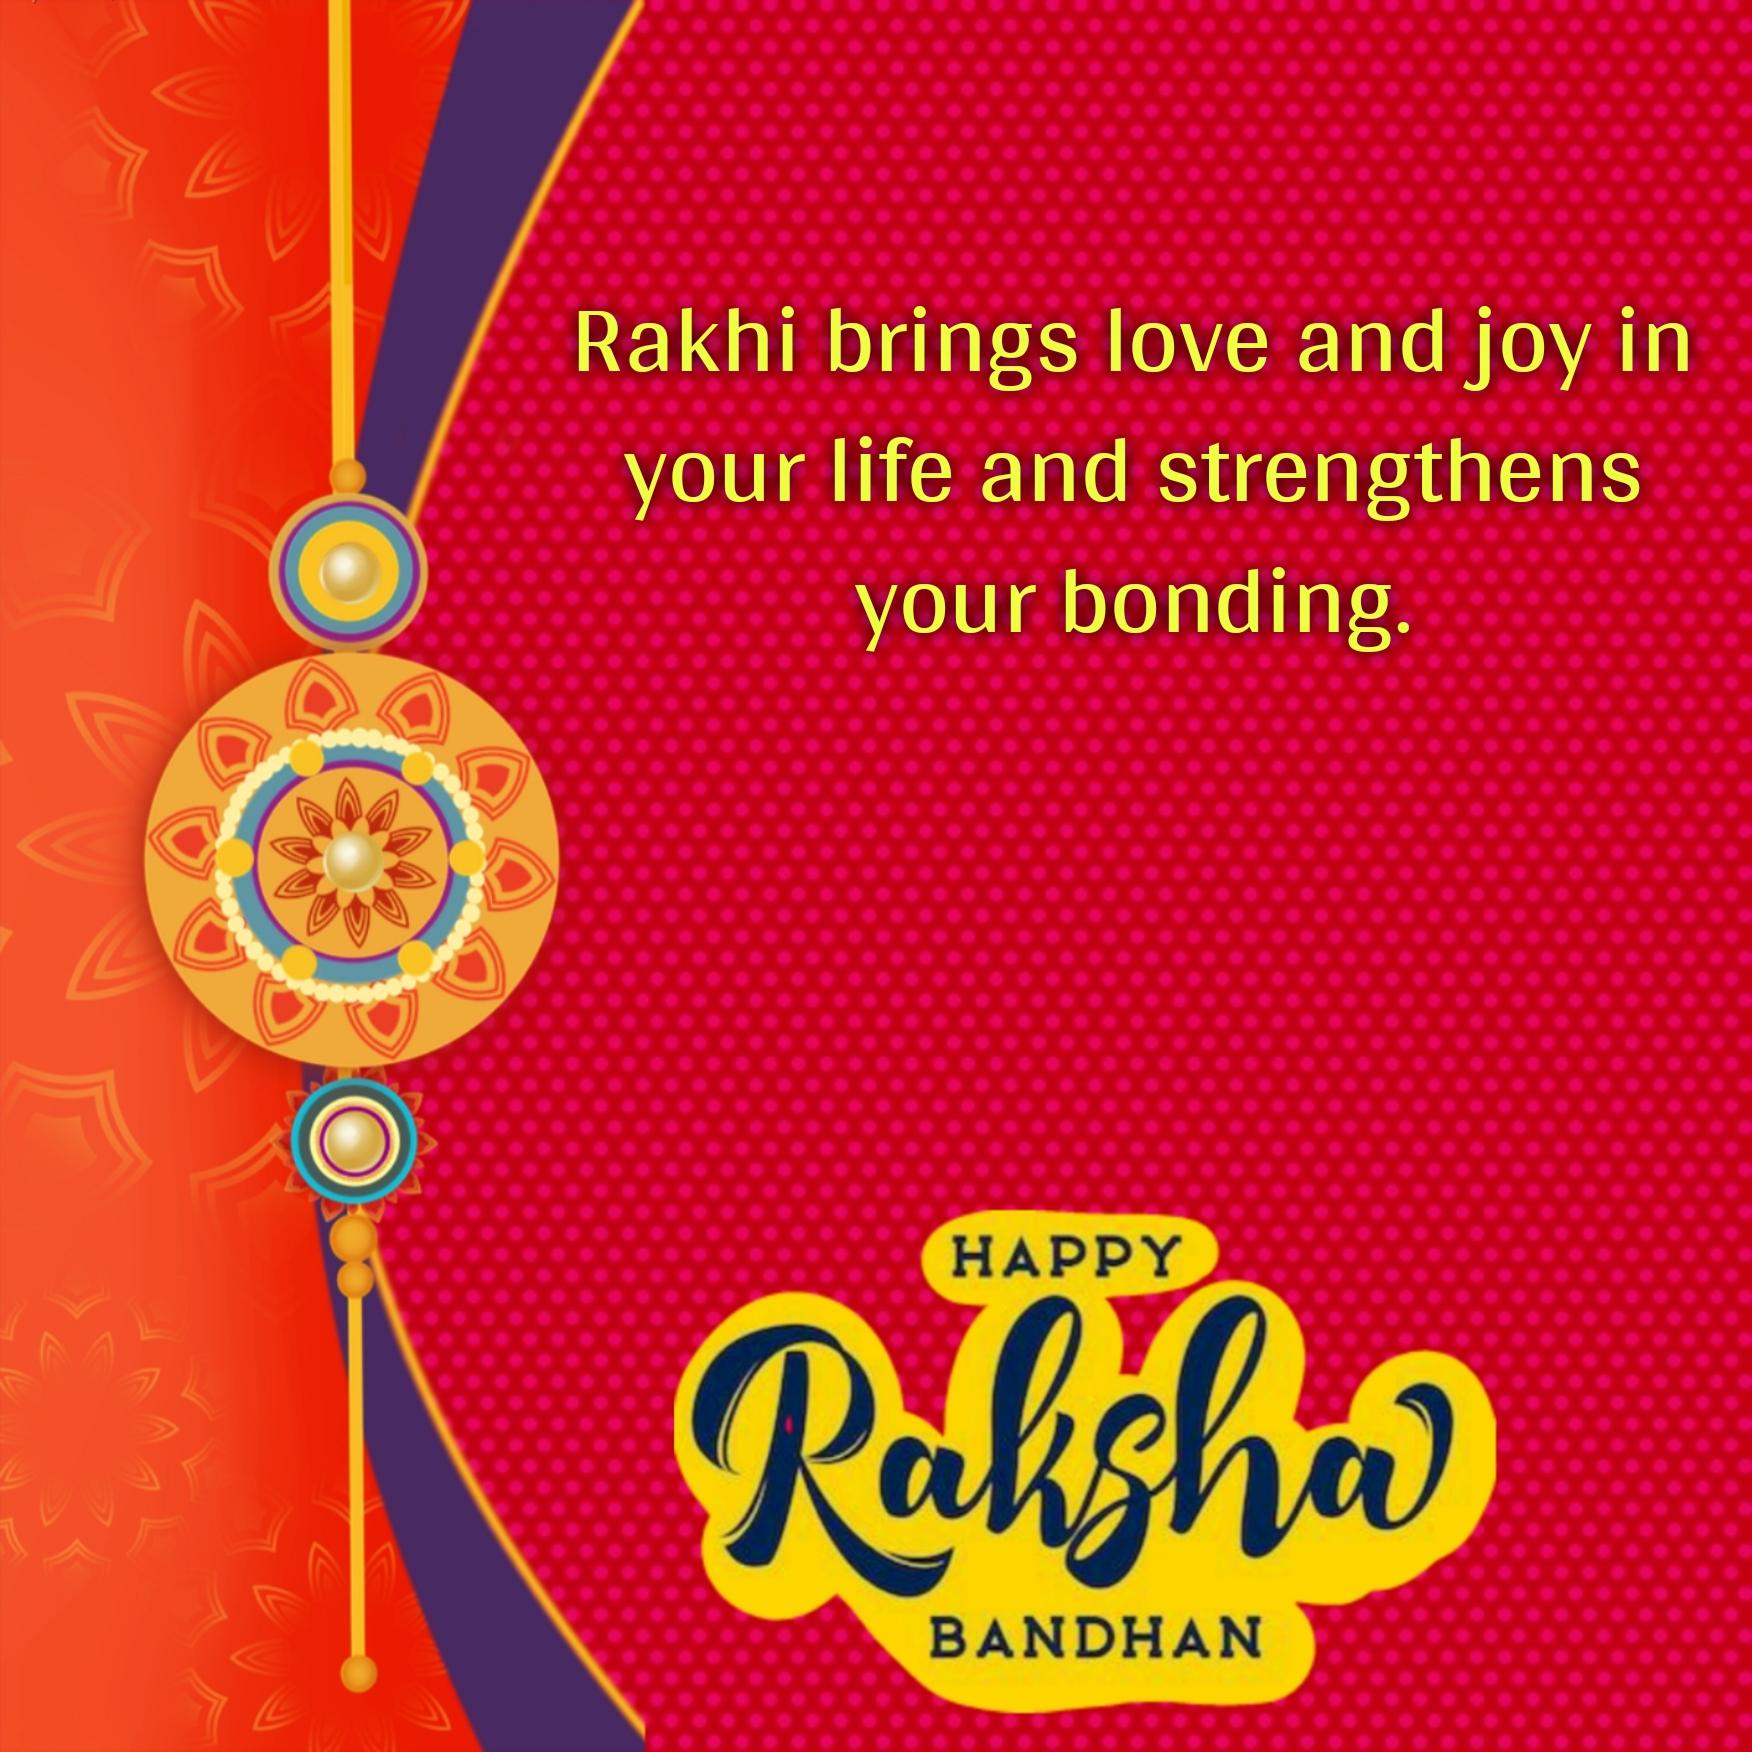 Rakhi brings love and joy in your life and strengthens your bonding